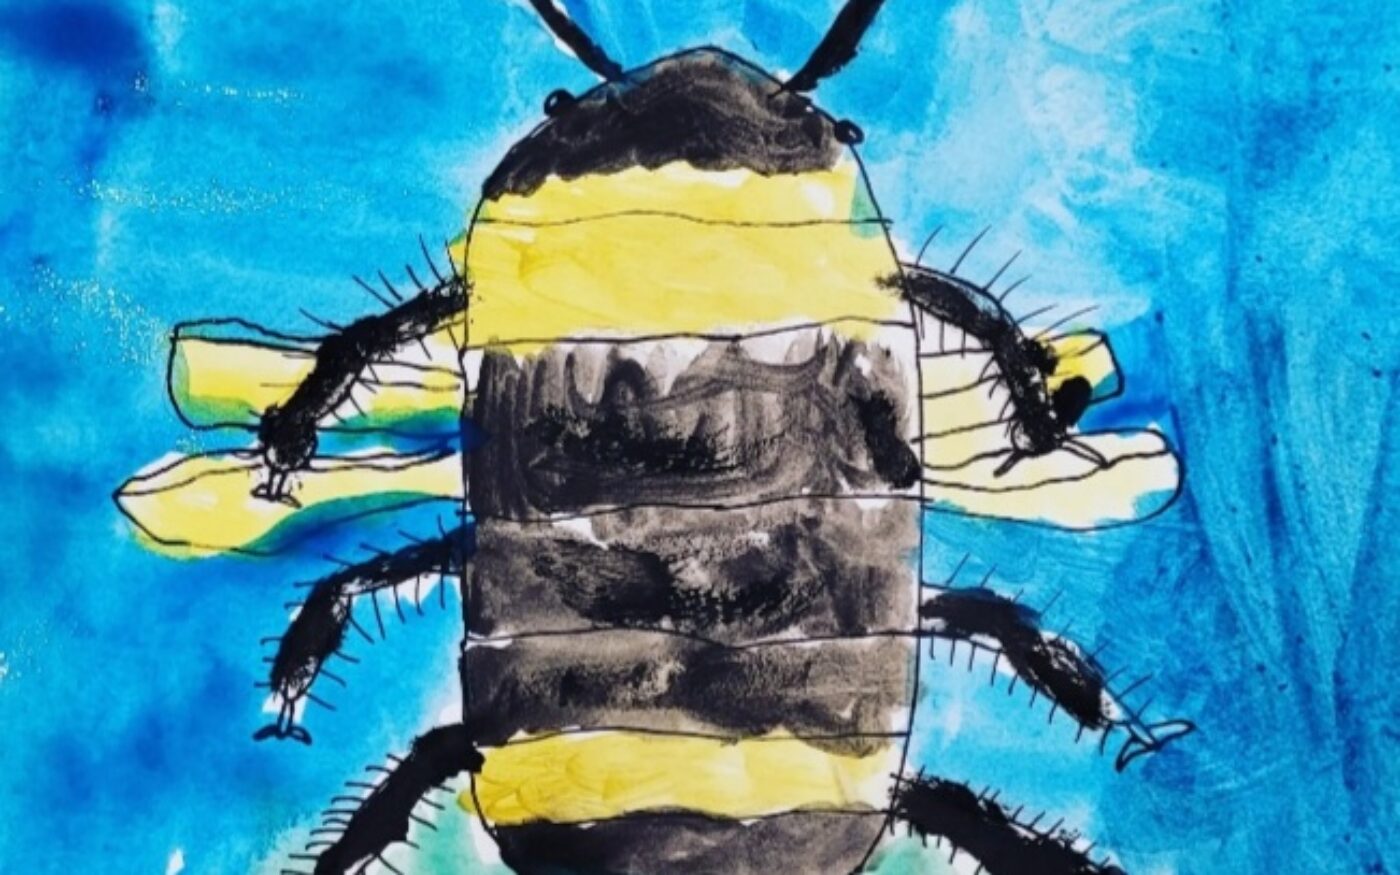 Big and Brightly Coloured Bumble Bee by Aidan Warwick, winner of endangered insects category, Insect Week 2022 art competition